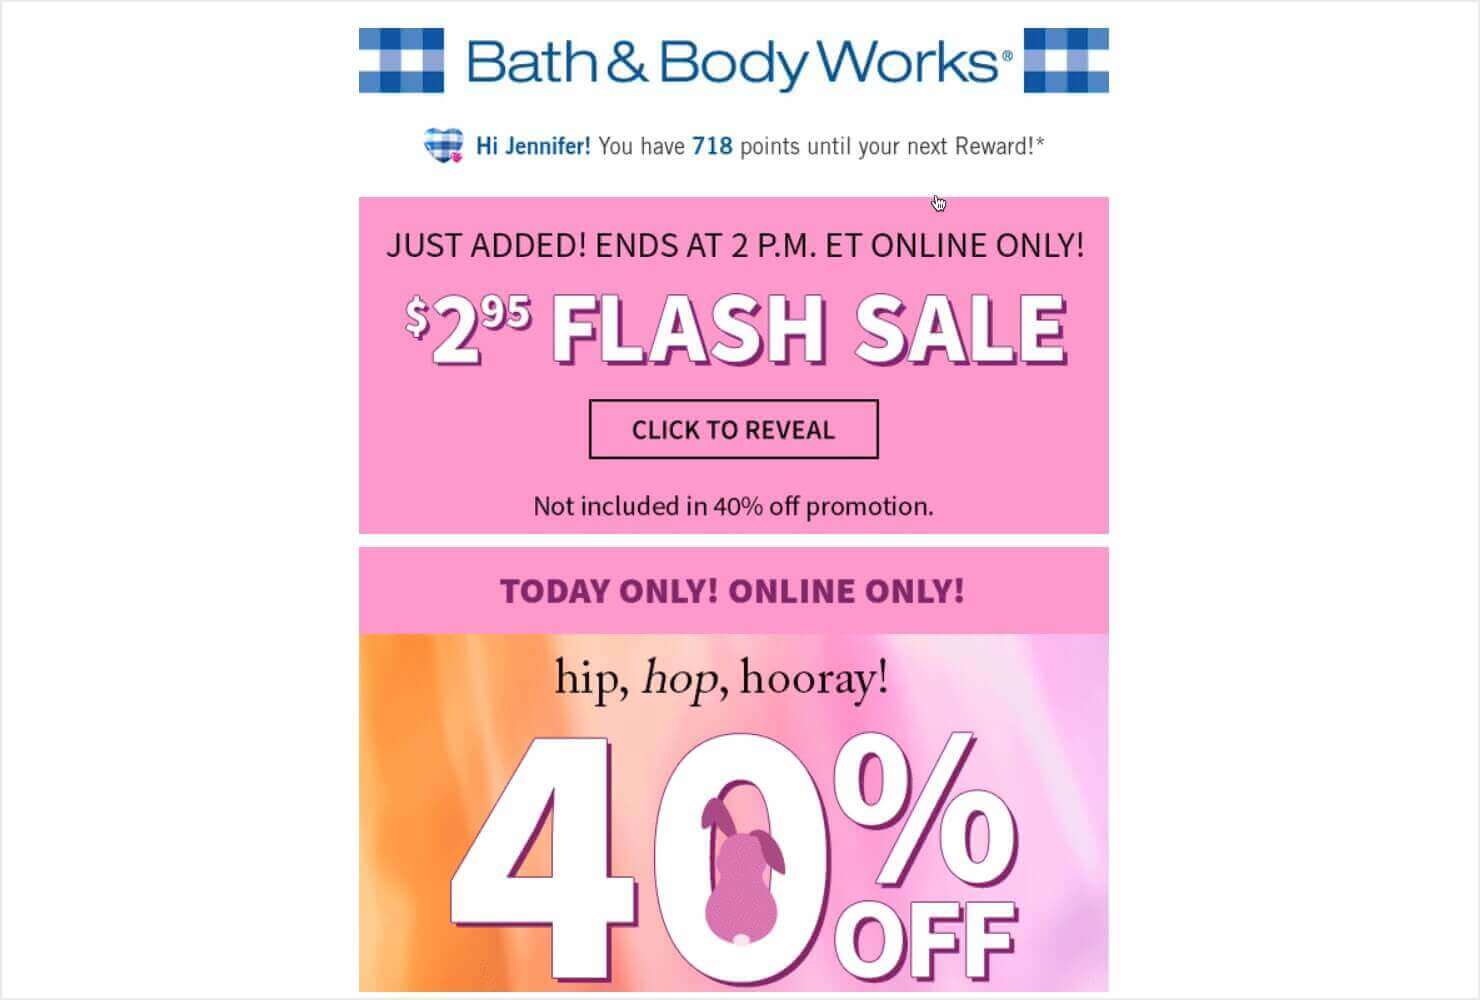 Email from Bath & BodyWorks. It starts "Just Added! Ends at 2 pm ET Online Only! $2.95 FLASH SALE." There's a button that says "Click to reveal." Below, the 40% off graphic from the announcement email is repeated.